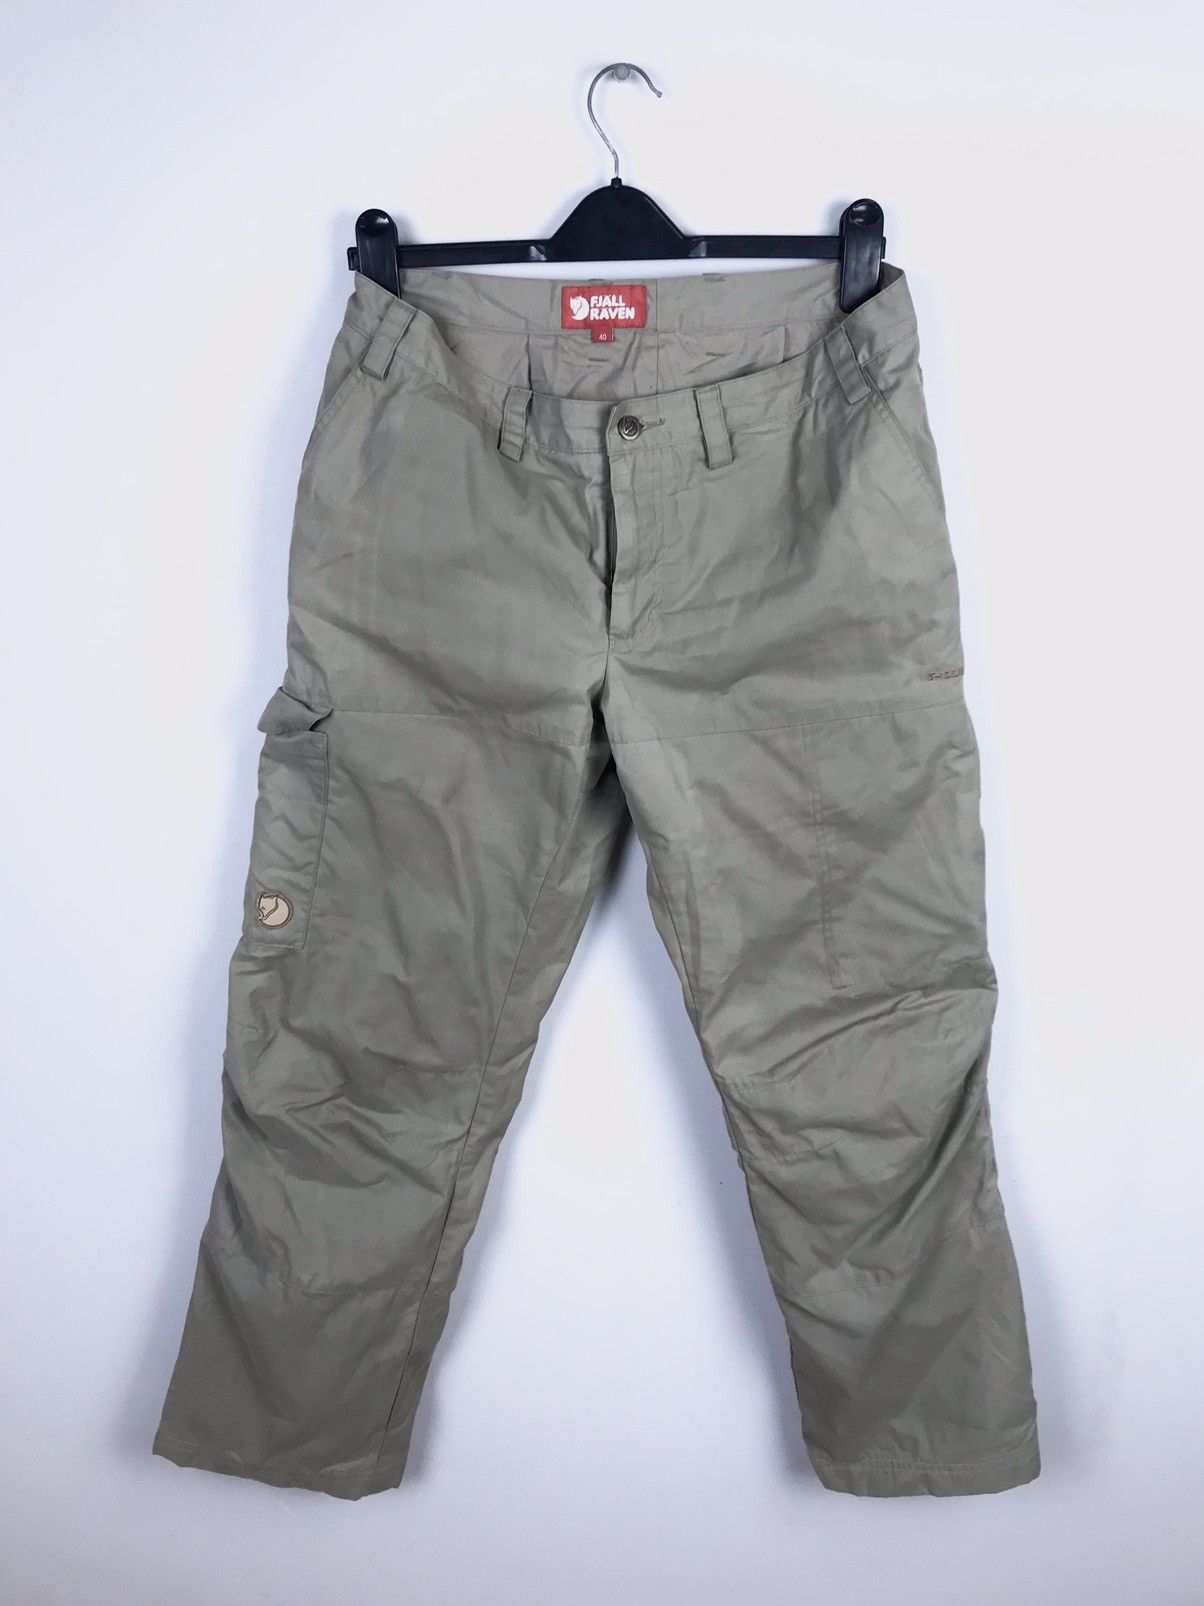 Fjallraven Fjallraven G-1000 Insulated Cargo Pants,Hydratic,Trousers